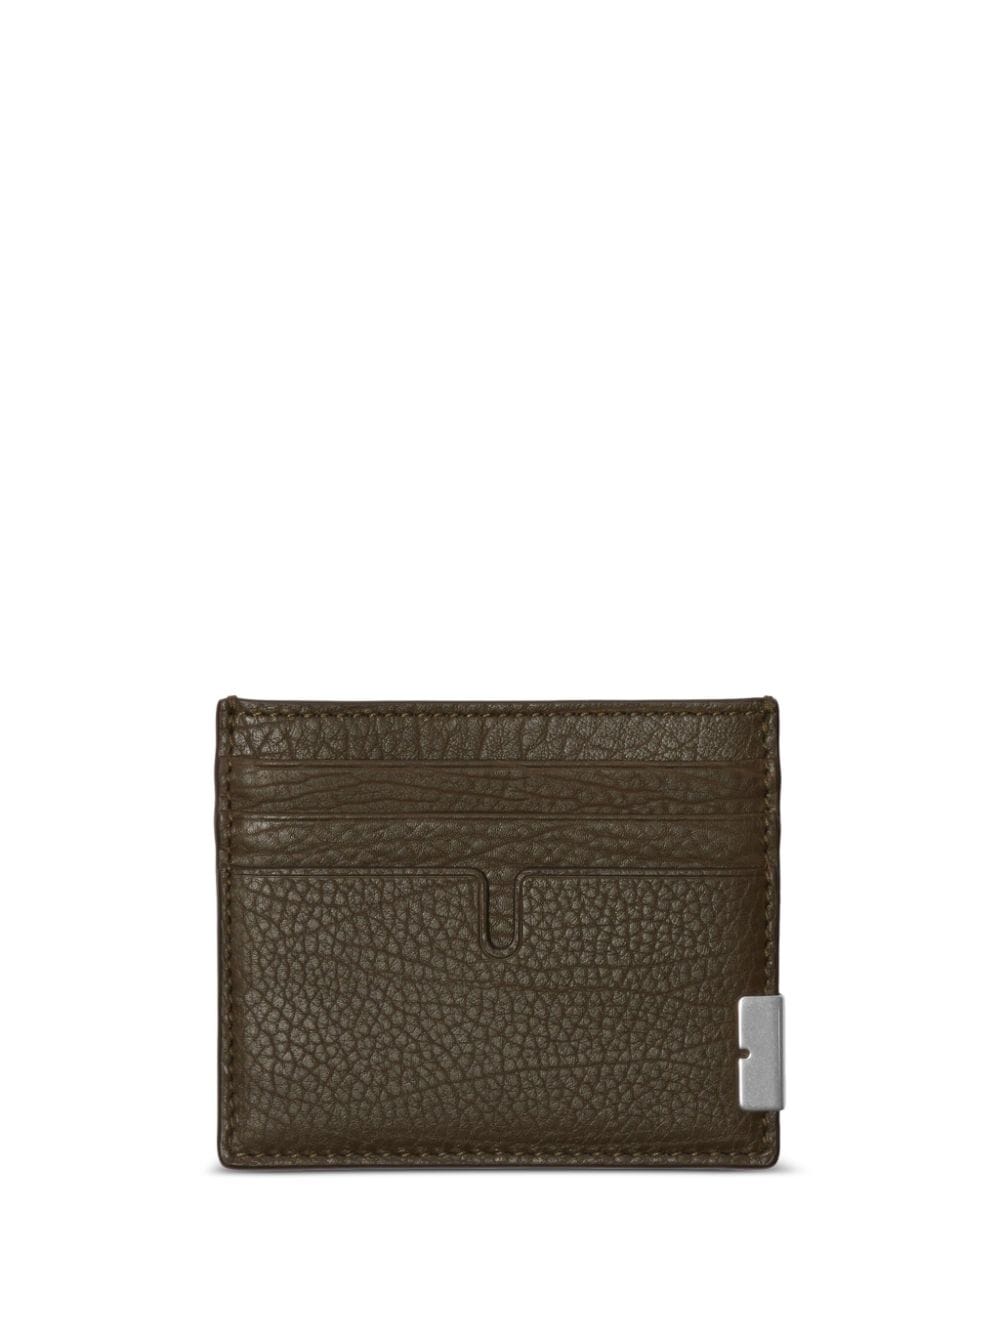 Burberry Tall B leather cardholder - Brown von Burberry